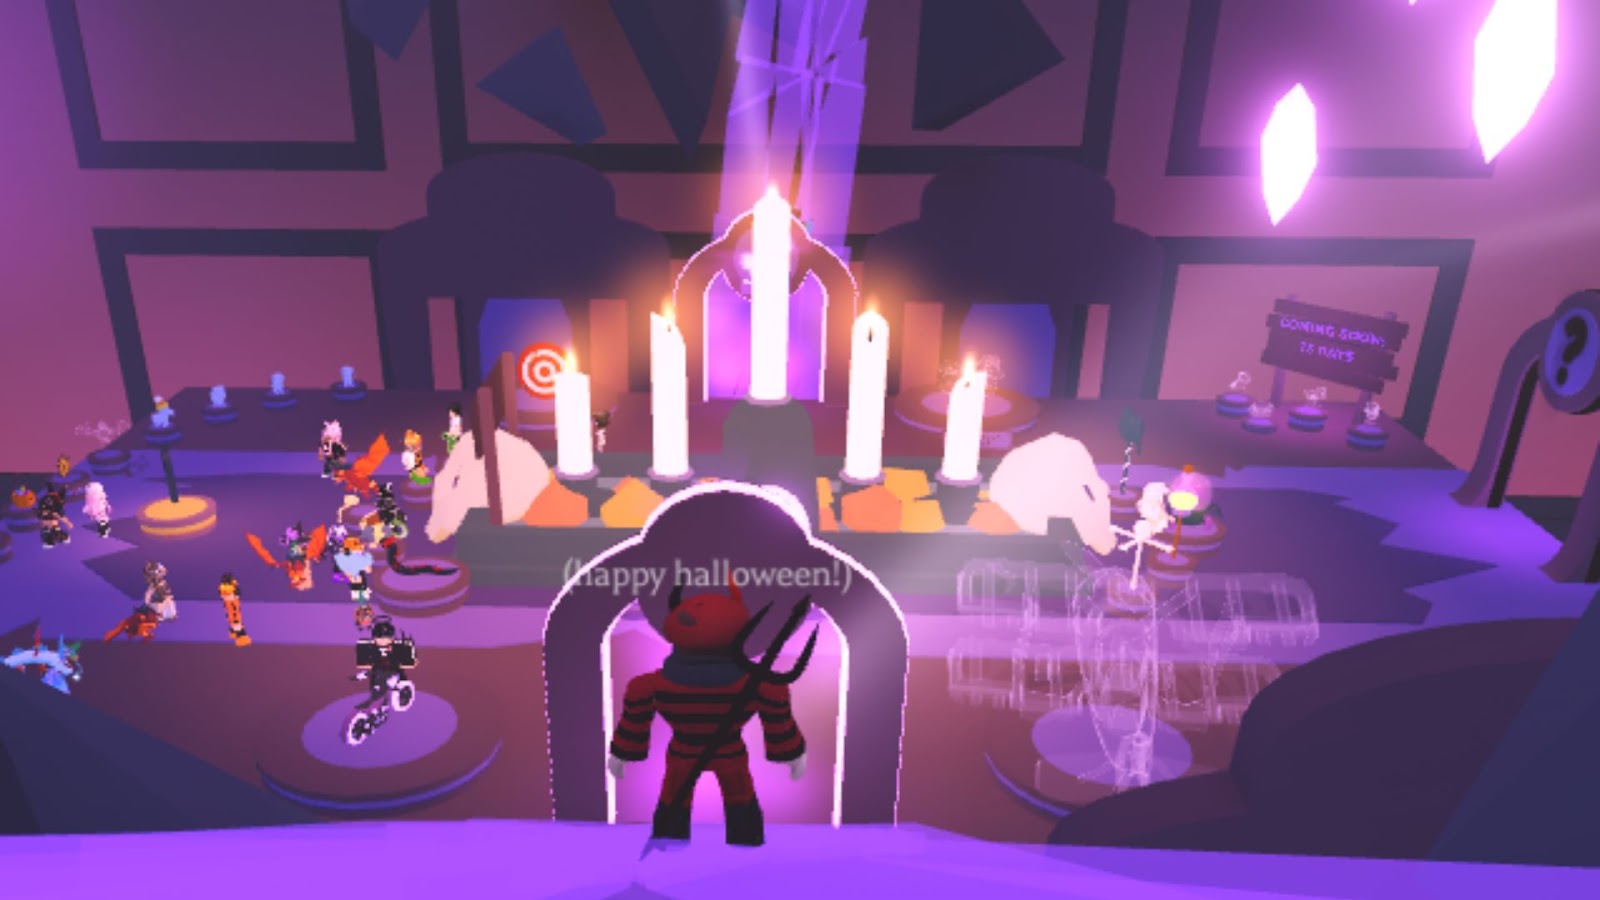 Gaming With Mingo: Roblox Adopt Me #HalloweenEvent  Chelsea's Mommy  Experiencing New Things Loving Life